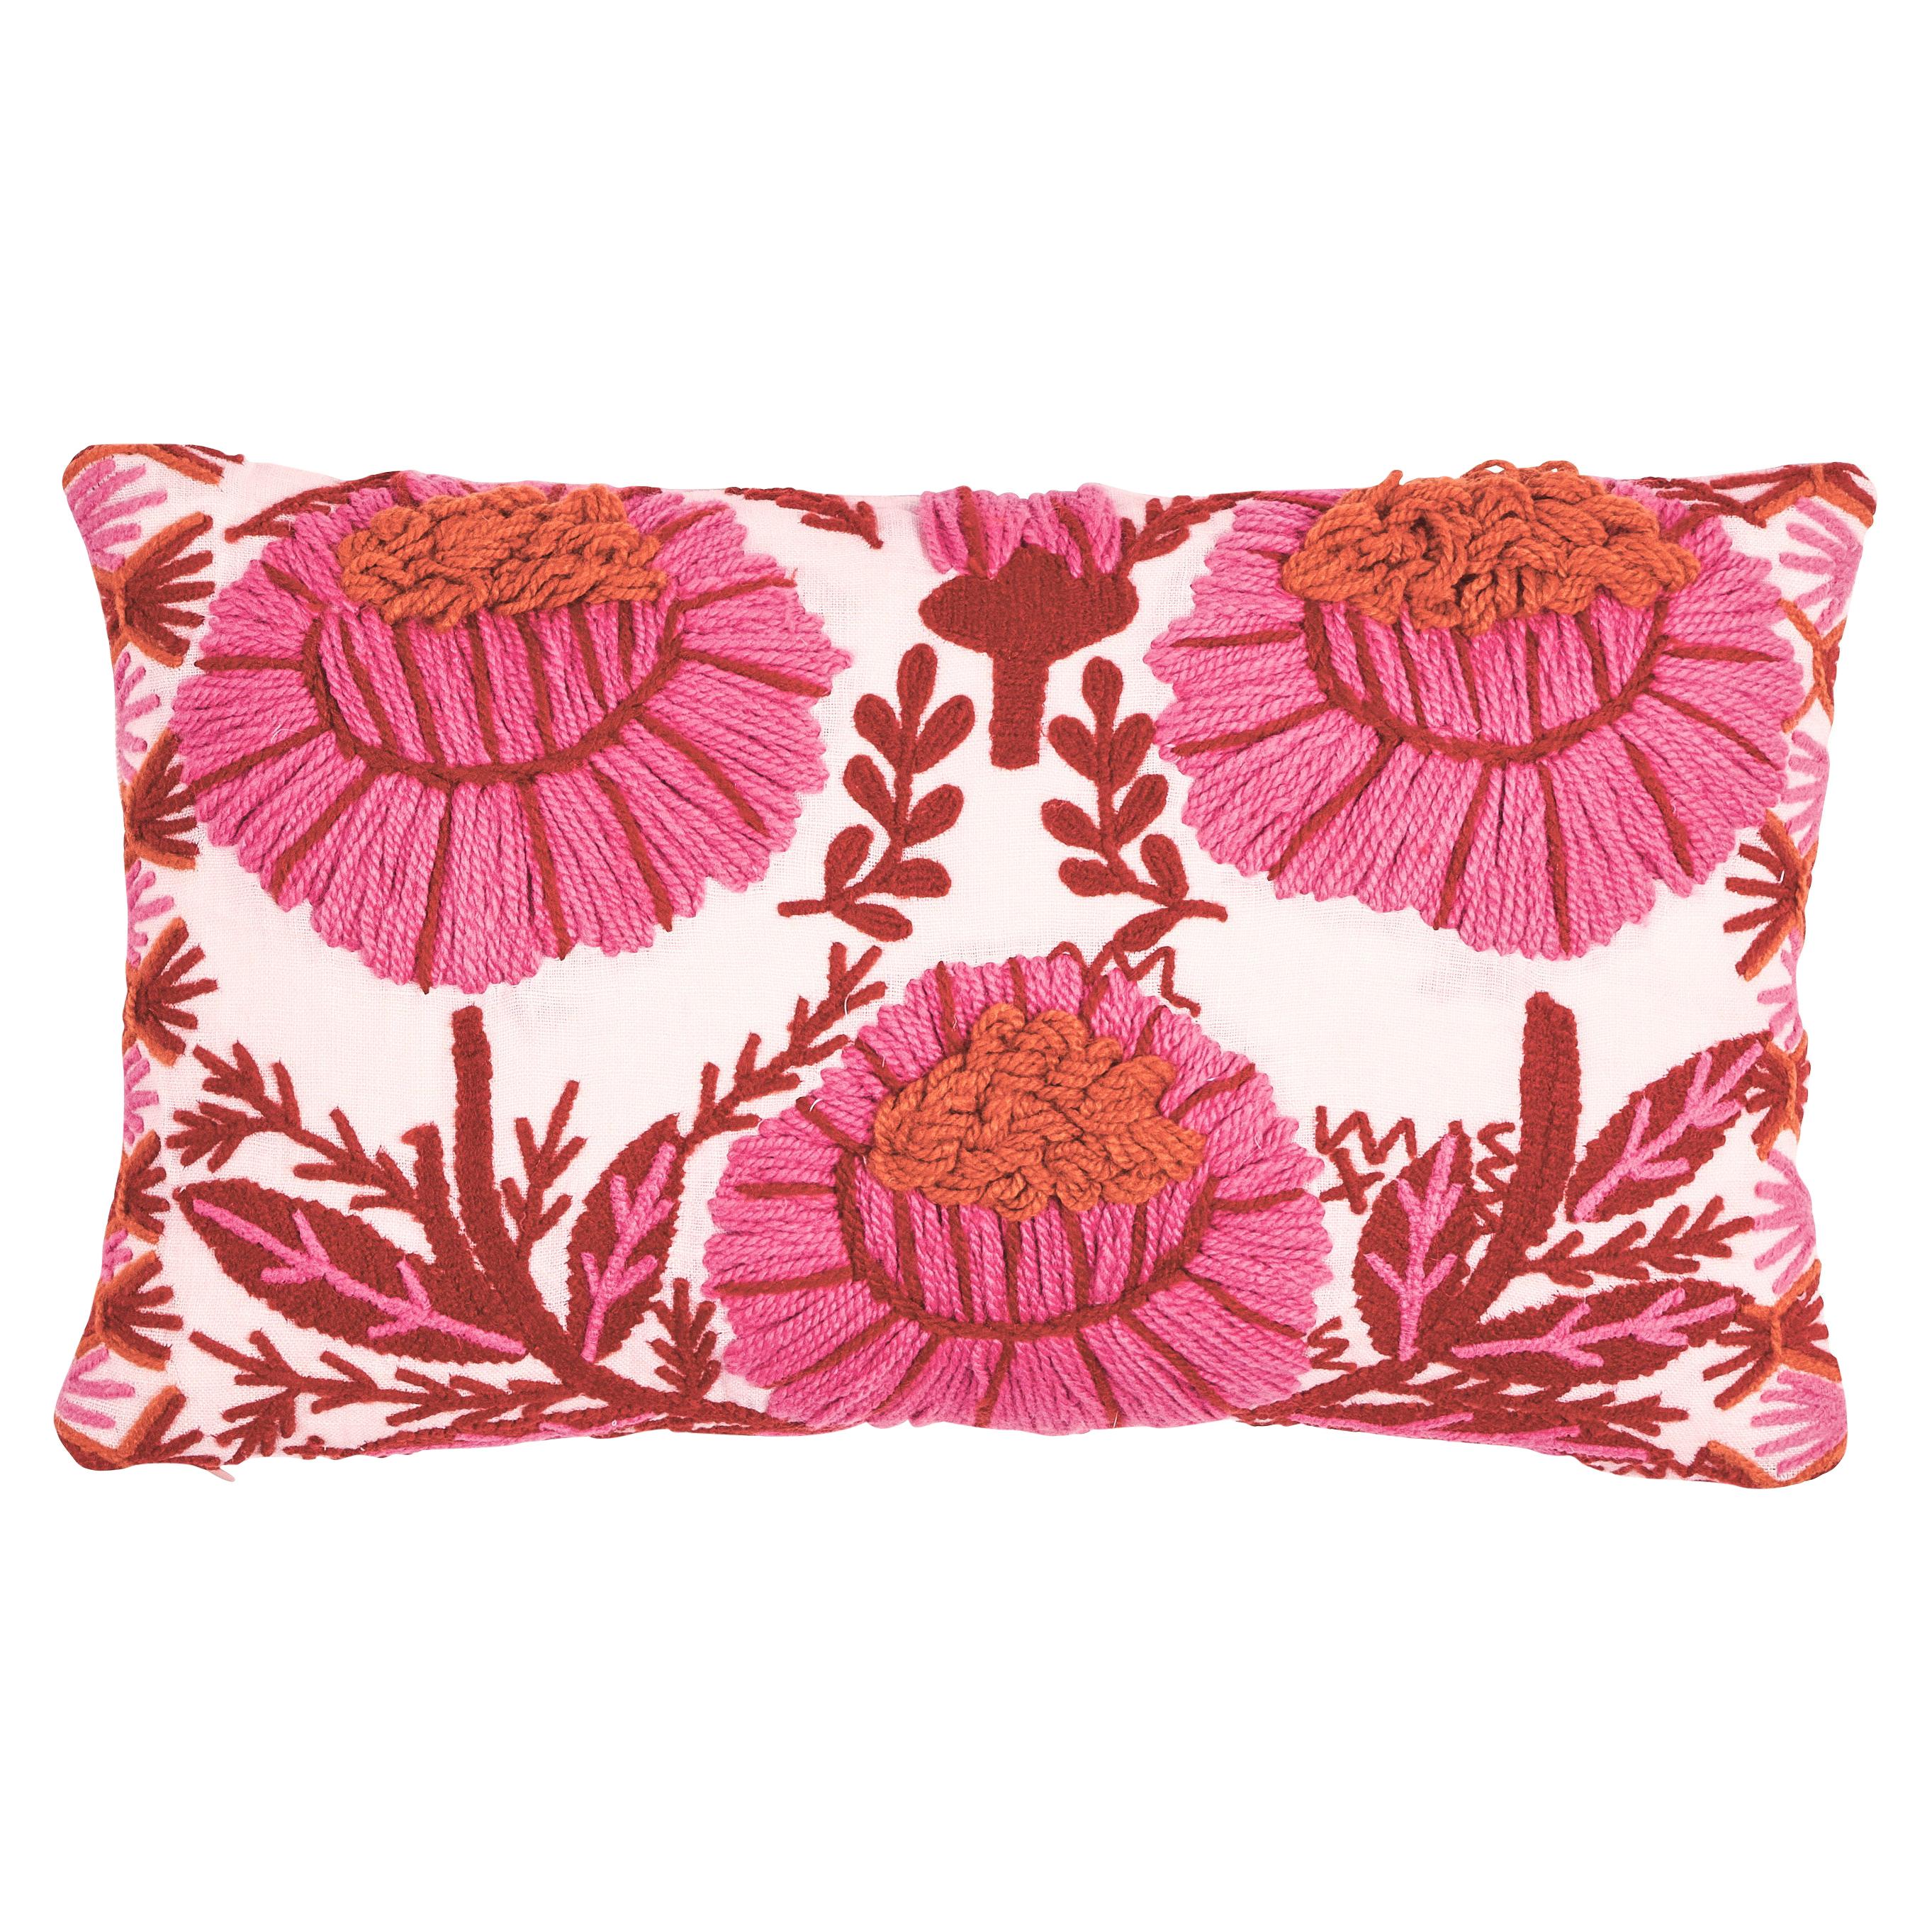 Schumacher Marguerite Embroidery Pillow in Blossom